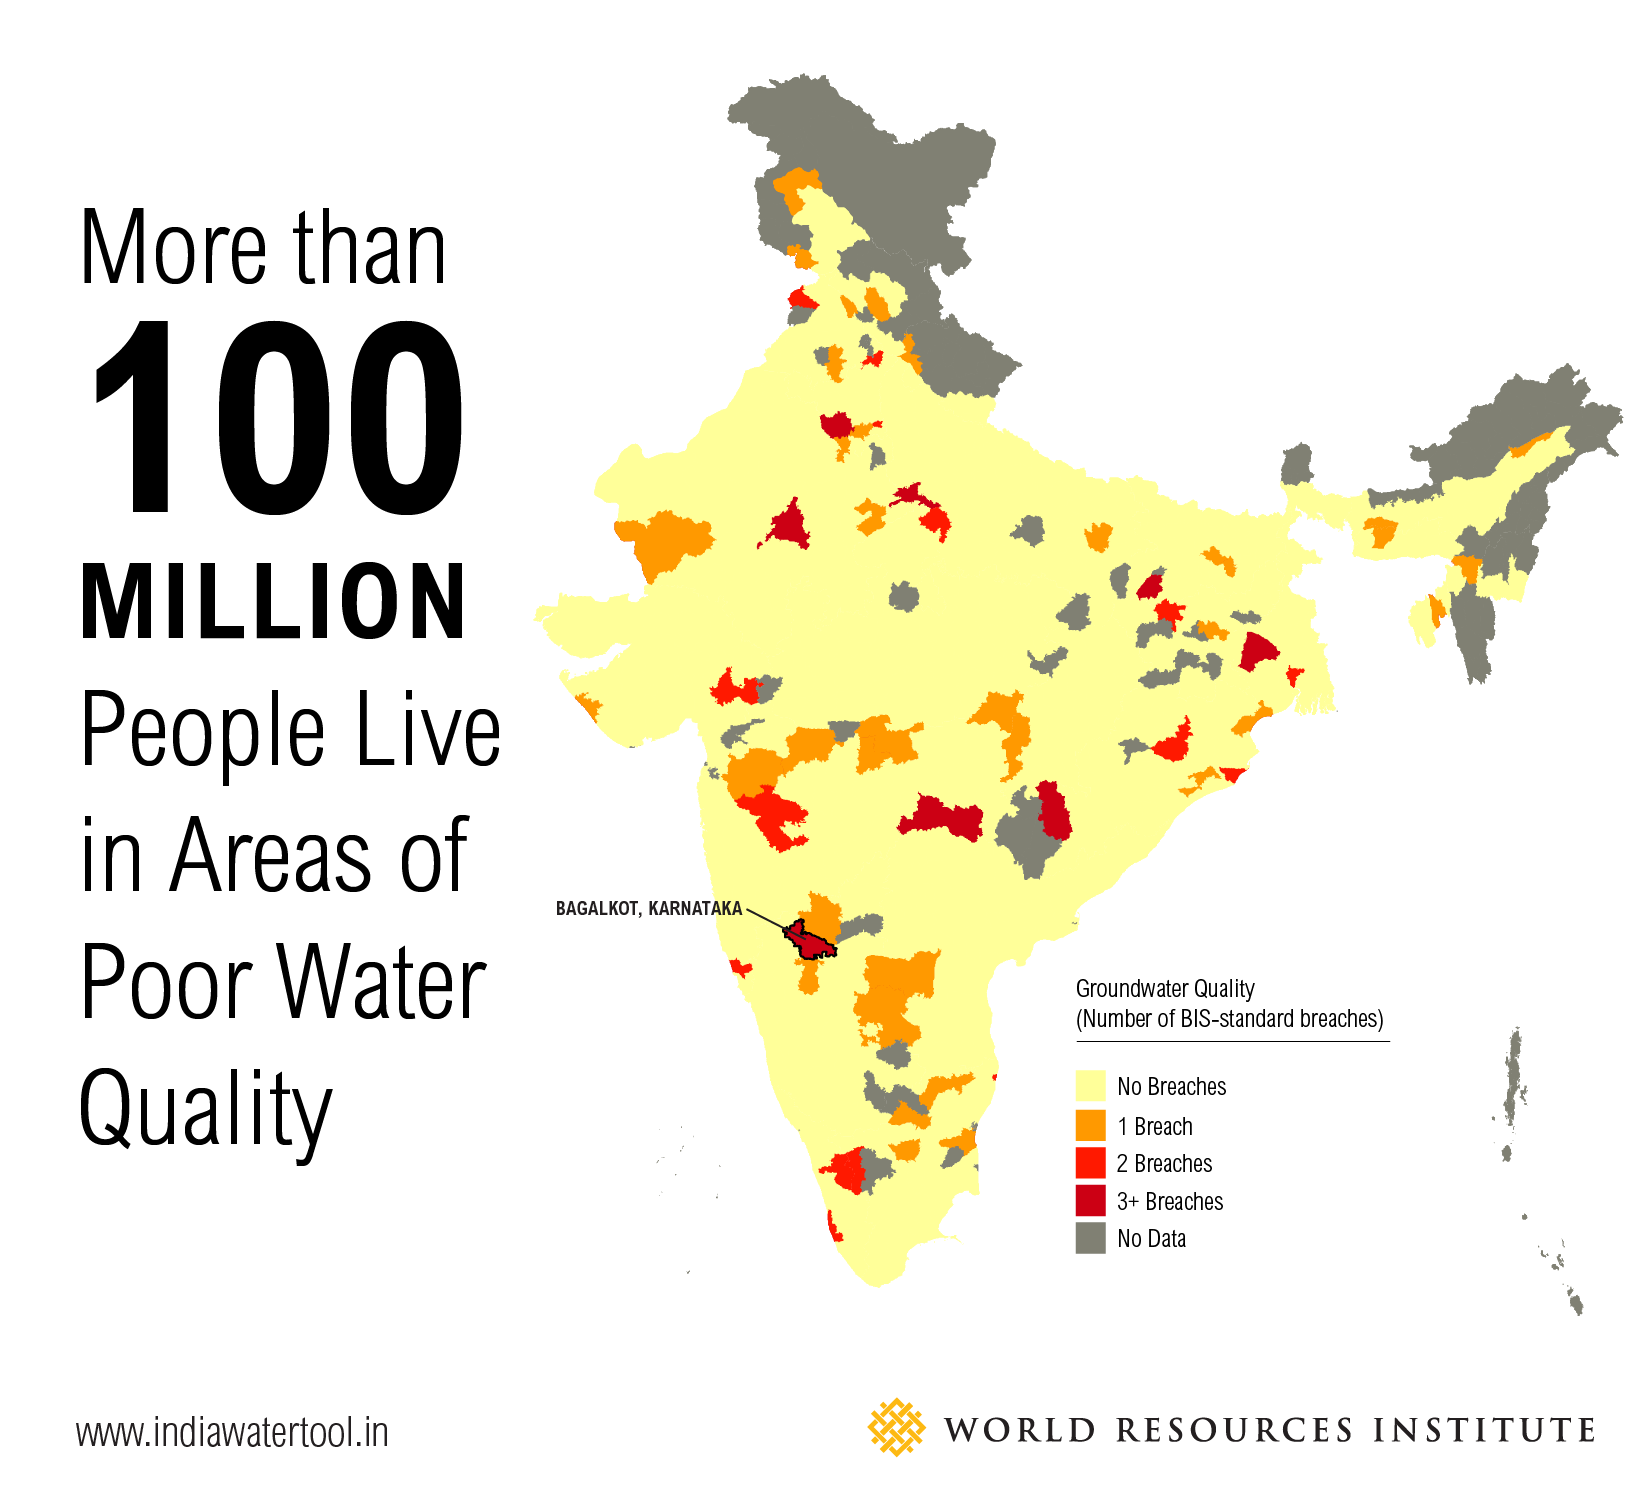 India’s Water Scarcity is Increasing, Threatening Millions of People